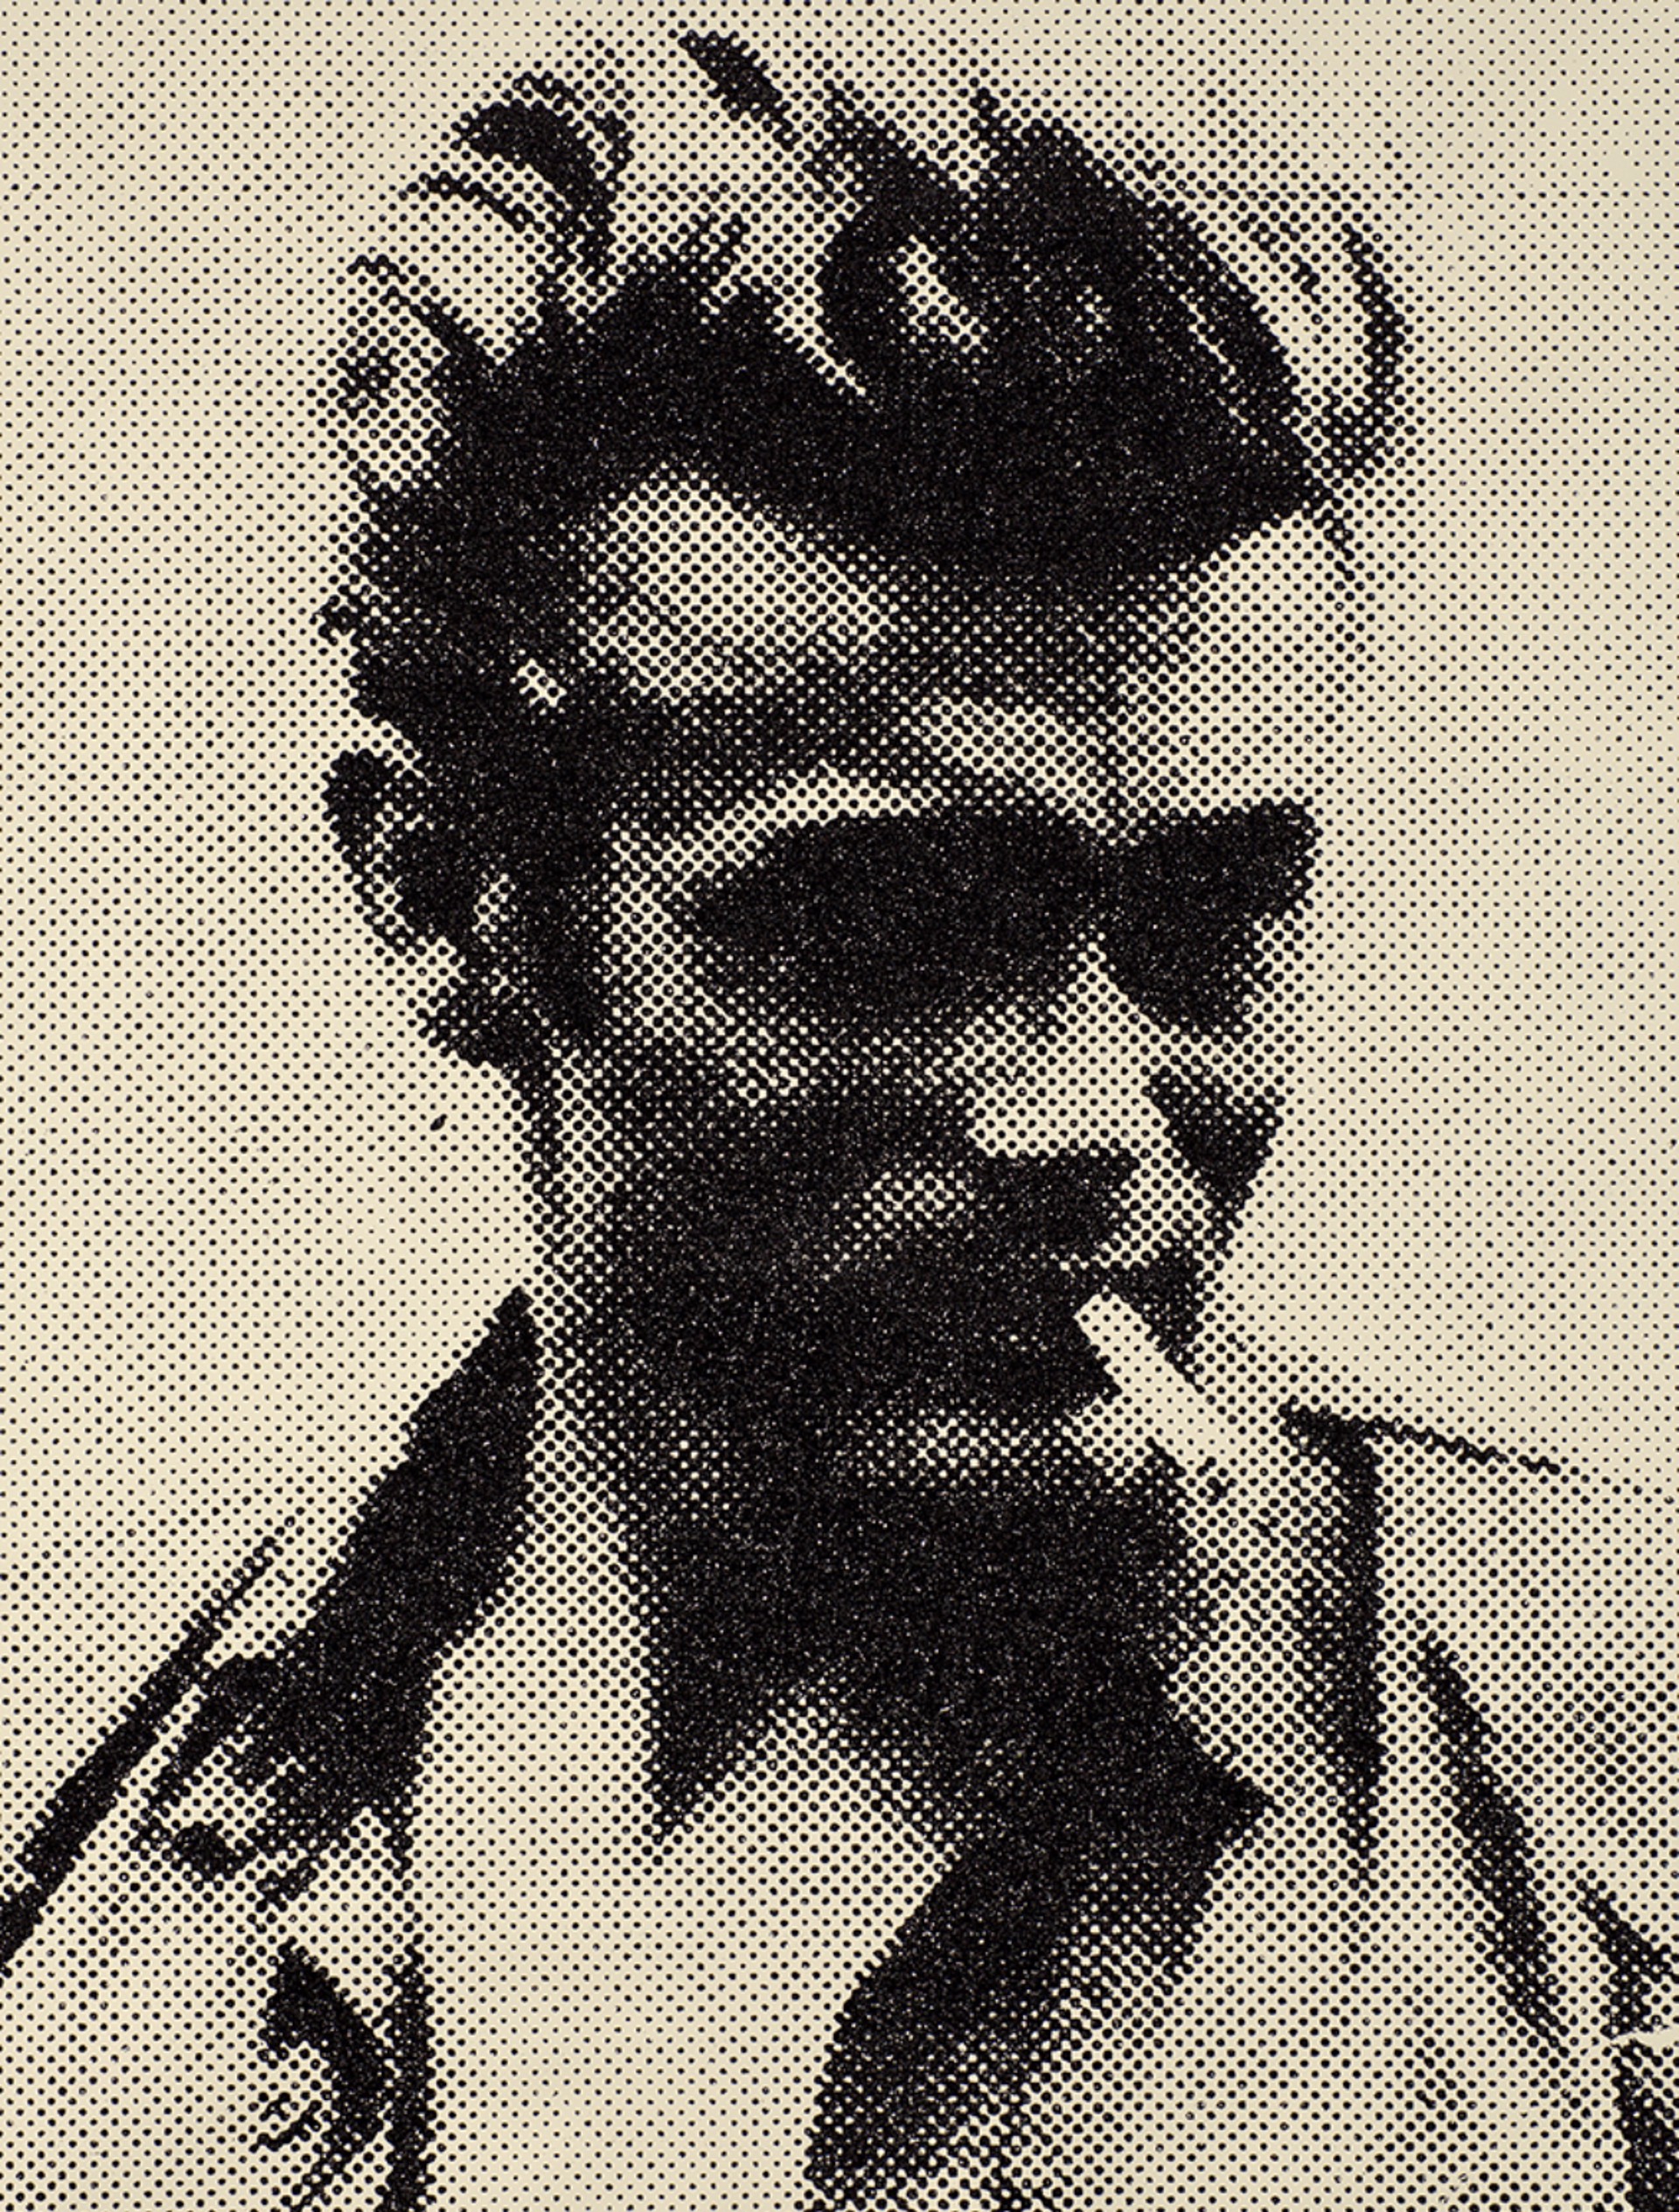 JAMES DEAN - B&W- by Russell Young